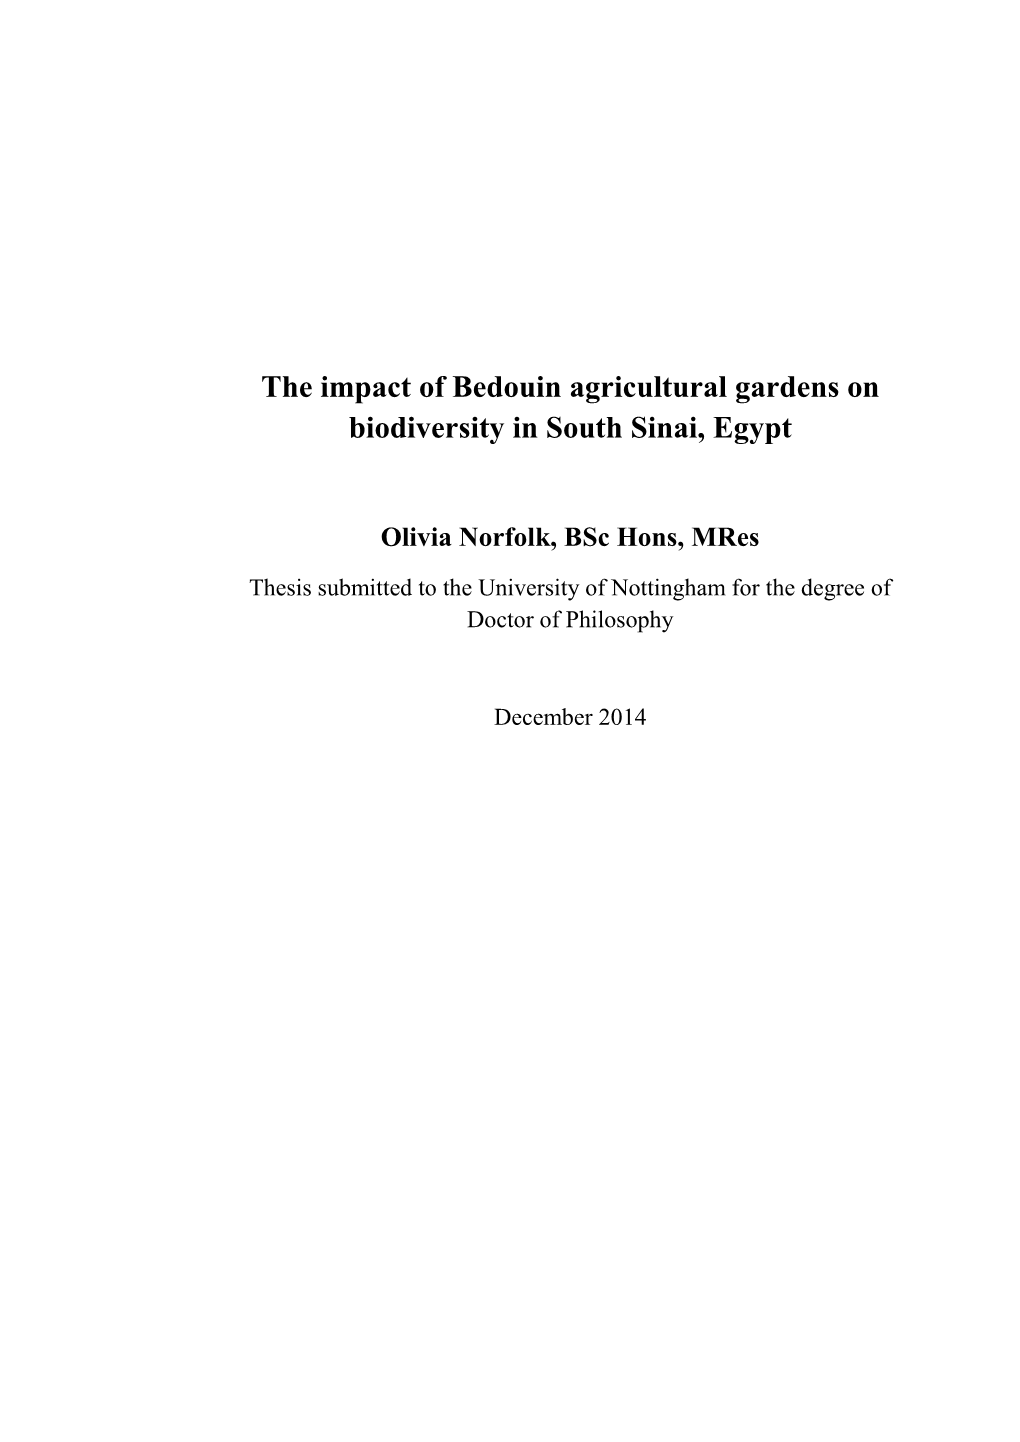 The Impact of Bedouin Agricultural Gardens on Biodiversity in South Sinai, Egypt